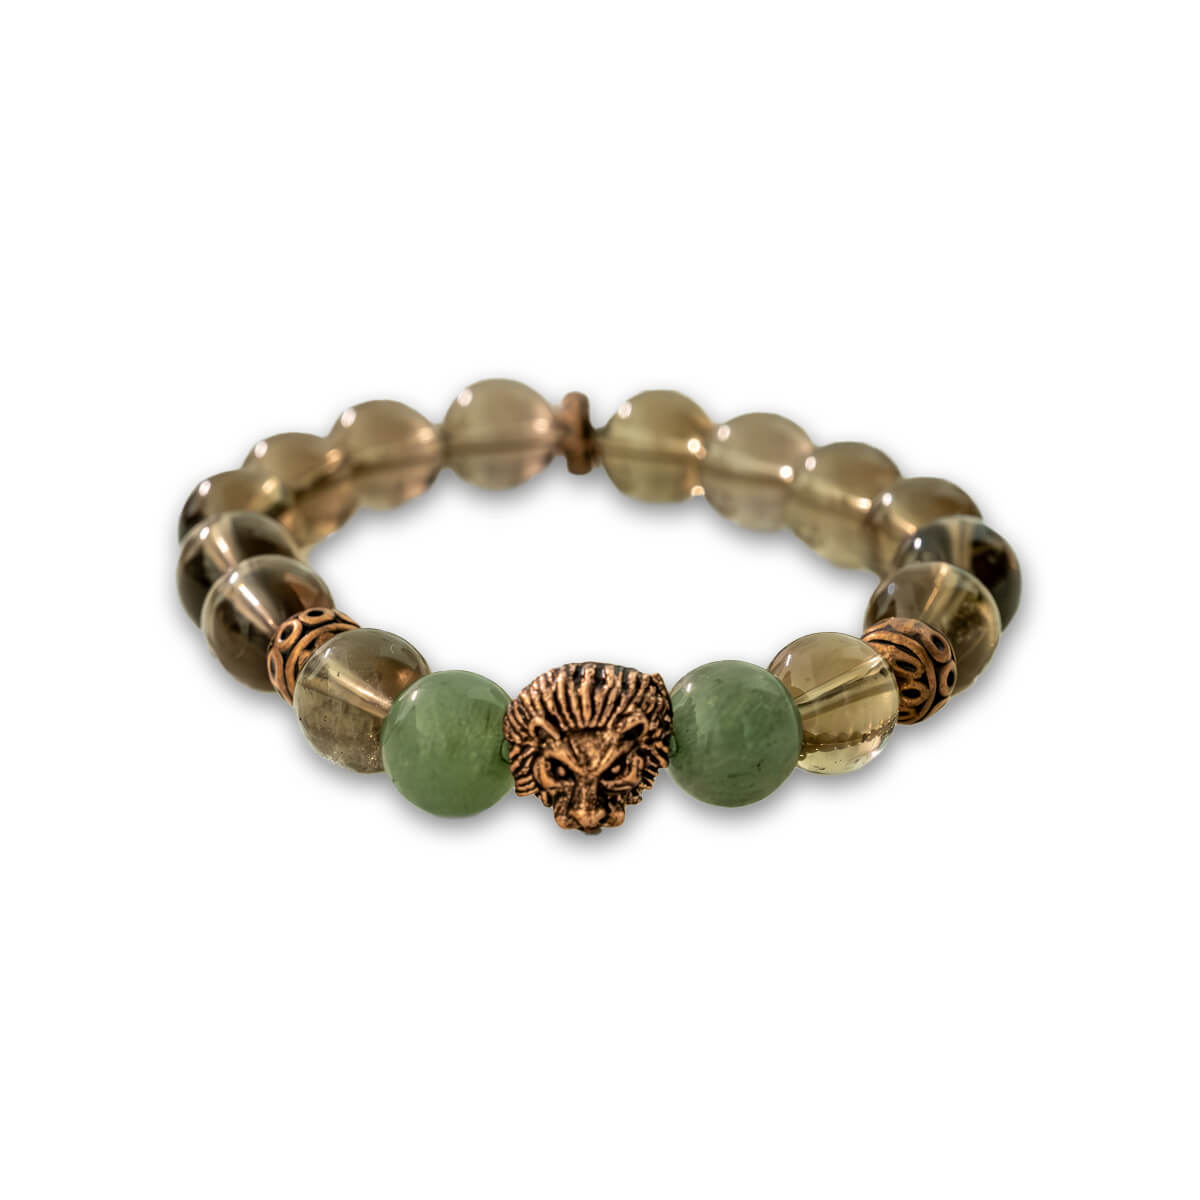 Frosted Green Aventurine and Smoky Quartz with Lion Charm Unisex Bracelet